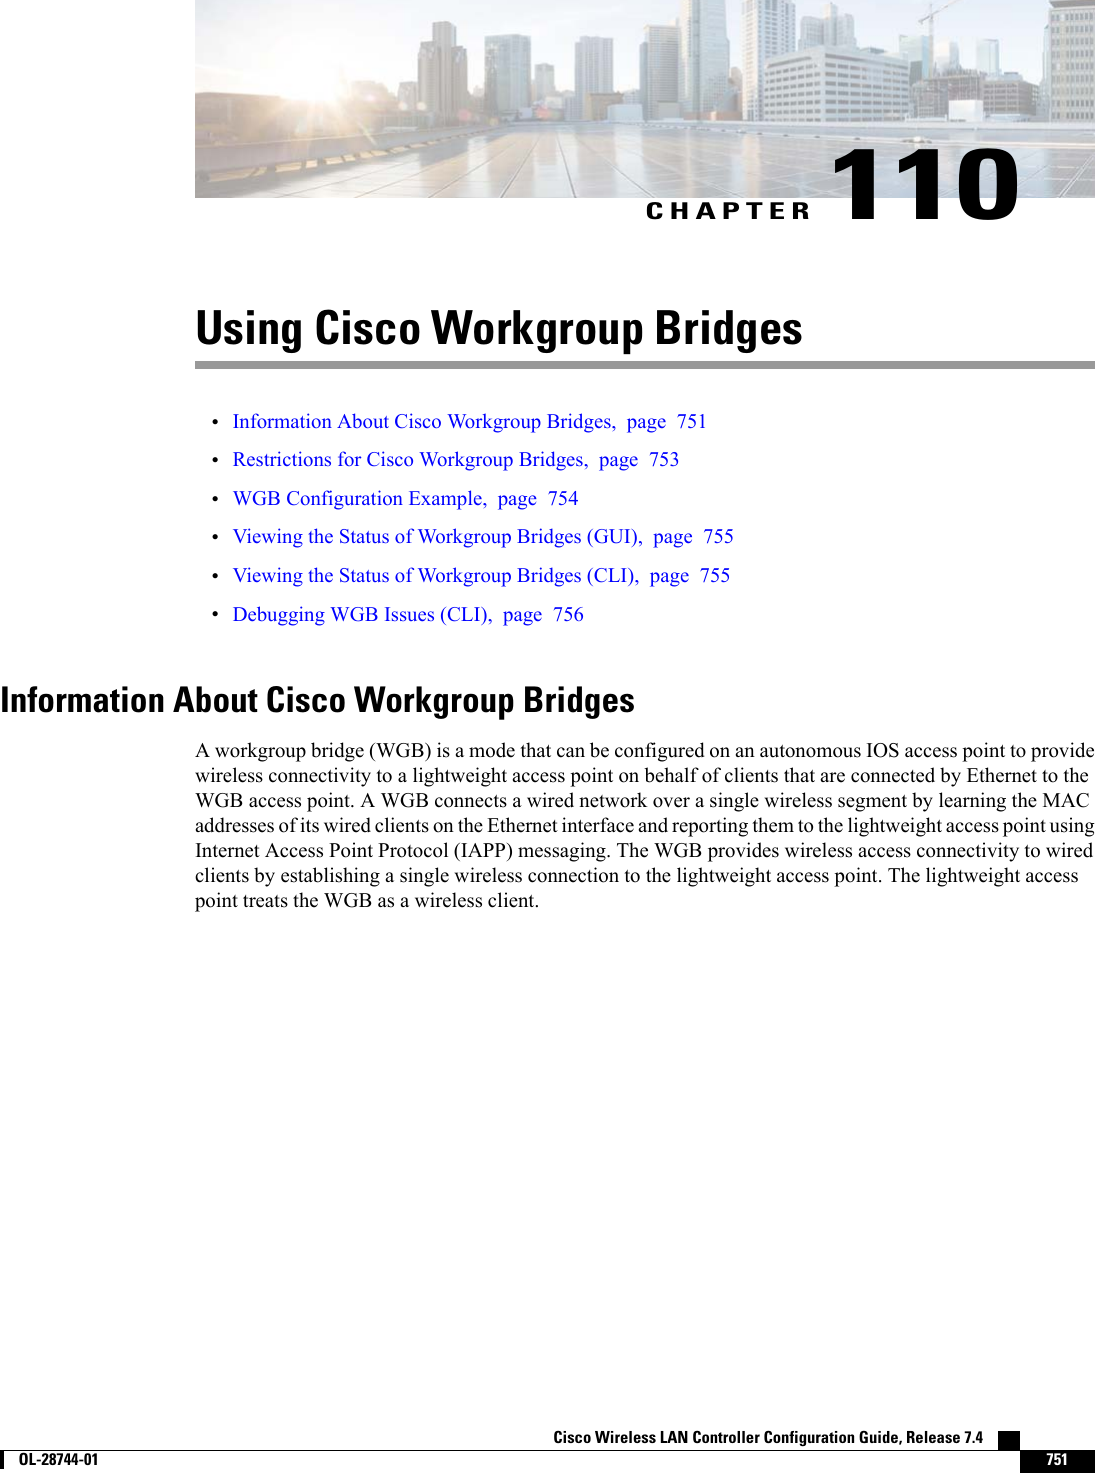 CHAPTER 110Using Cisco Workgroup Bridges•Information About Cisco Workgroup Bridges, page 751•Restrictions for Cisco Workgroup Bridges, page 753•WGB Configuration Example, page 754•Viewing the Status of Workgroup Bridges (GUI), page 755•Viewing the Status of Workgroup Bridges (CLI), page 755•Debugging WGB Issues (CLI), page 756Information About Cisco Workgroup BridgesA workgroup bridge (WGB) is a mode that can be configured on an autonomous IOS access point to providewireless connectivity to a lightweight access point on behalf of clients that are connected by Ethernet to theWGB access point. A WGB connects a wired network over a single wireless segment by learning the MACaddresses of its wired clients on the Ethernet interface and reporting them to the lightweight access point usingInternet Access Point Protocol (IAPP) messaging. The WGB provides wireless access connectivity to wiredclients by establishing a single wireless connection to the lightweight access point. The lightweight accesspoint treats the WGB as a wireless client.Cisco Wireless LAN Controller Configuration Guide, Release 7.4        OL-28744-01 751